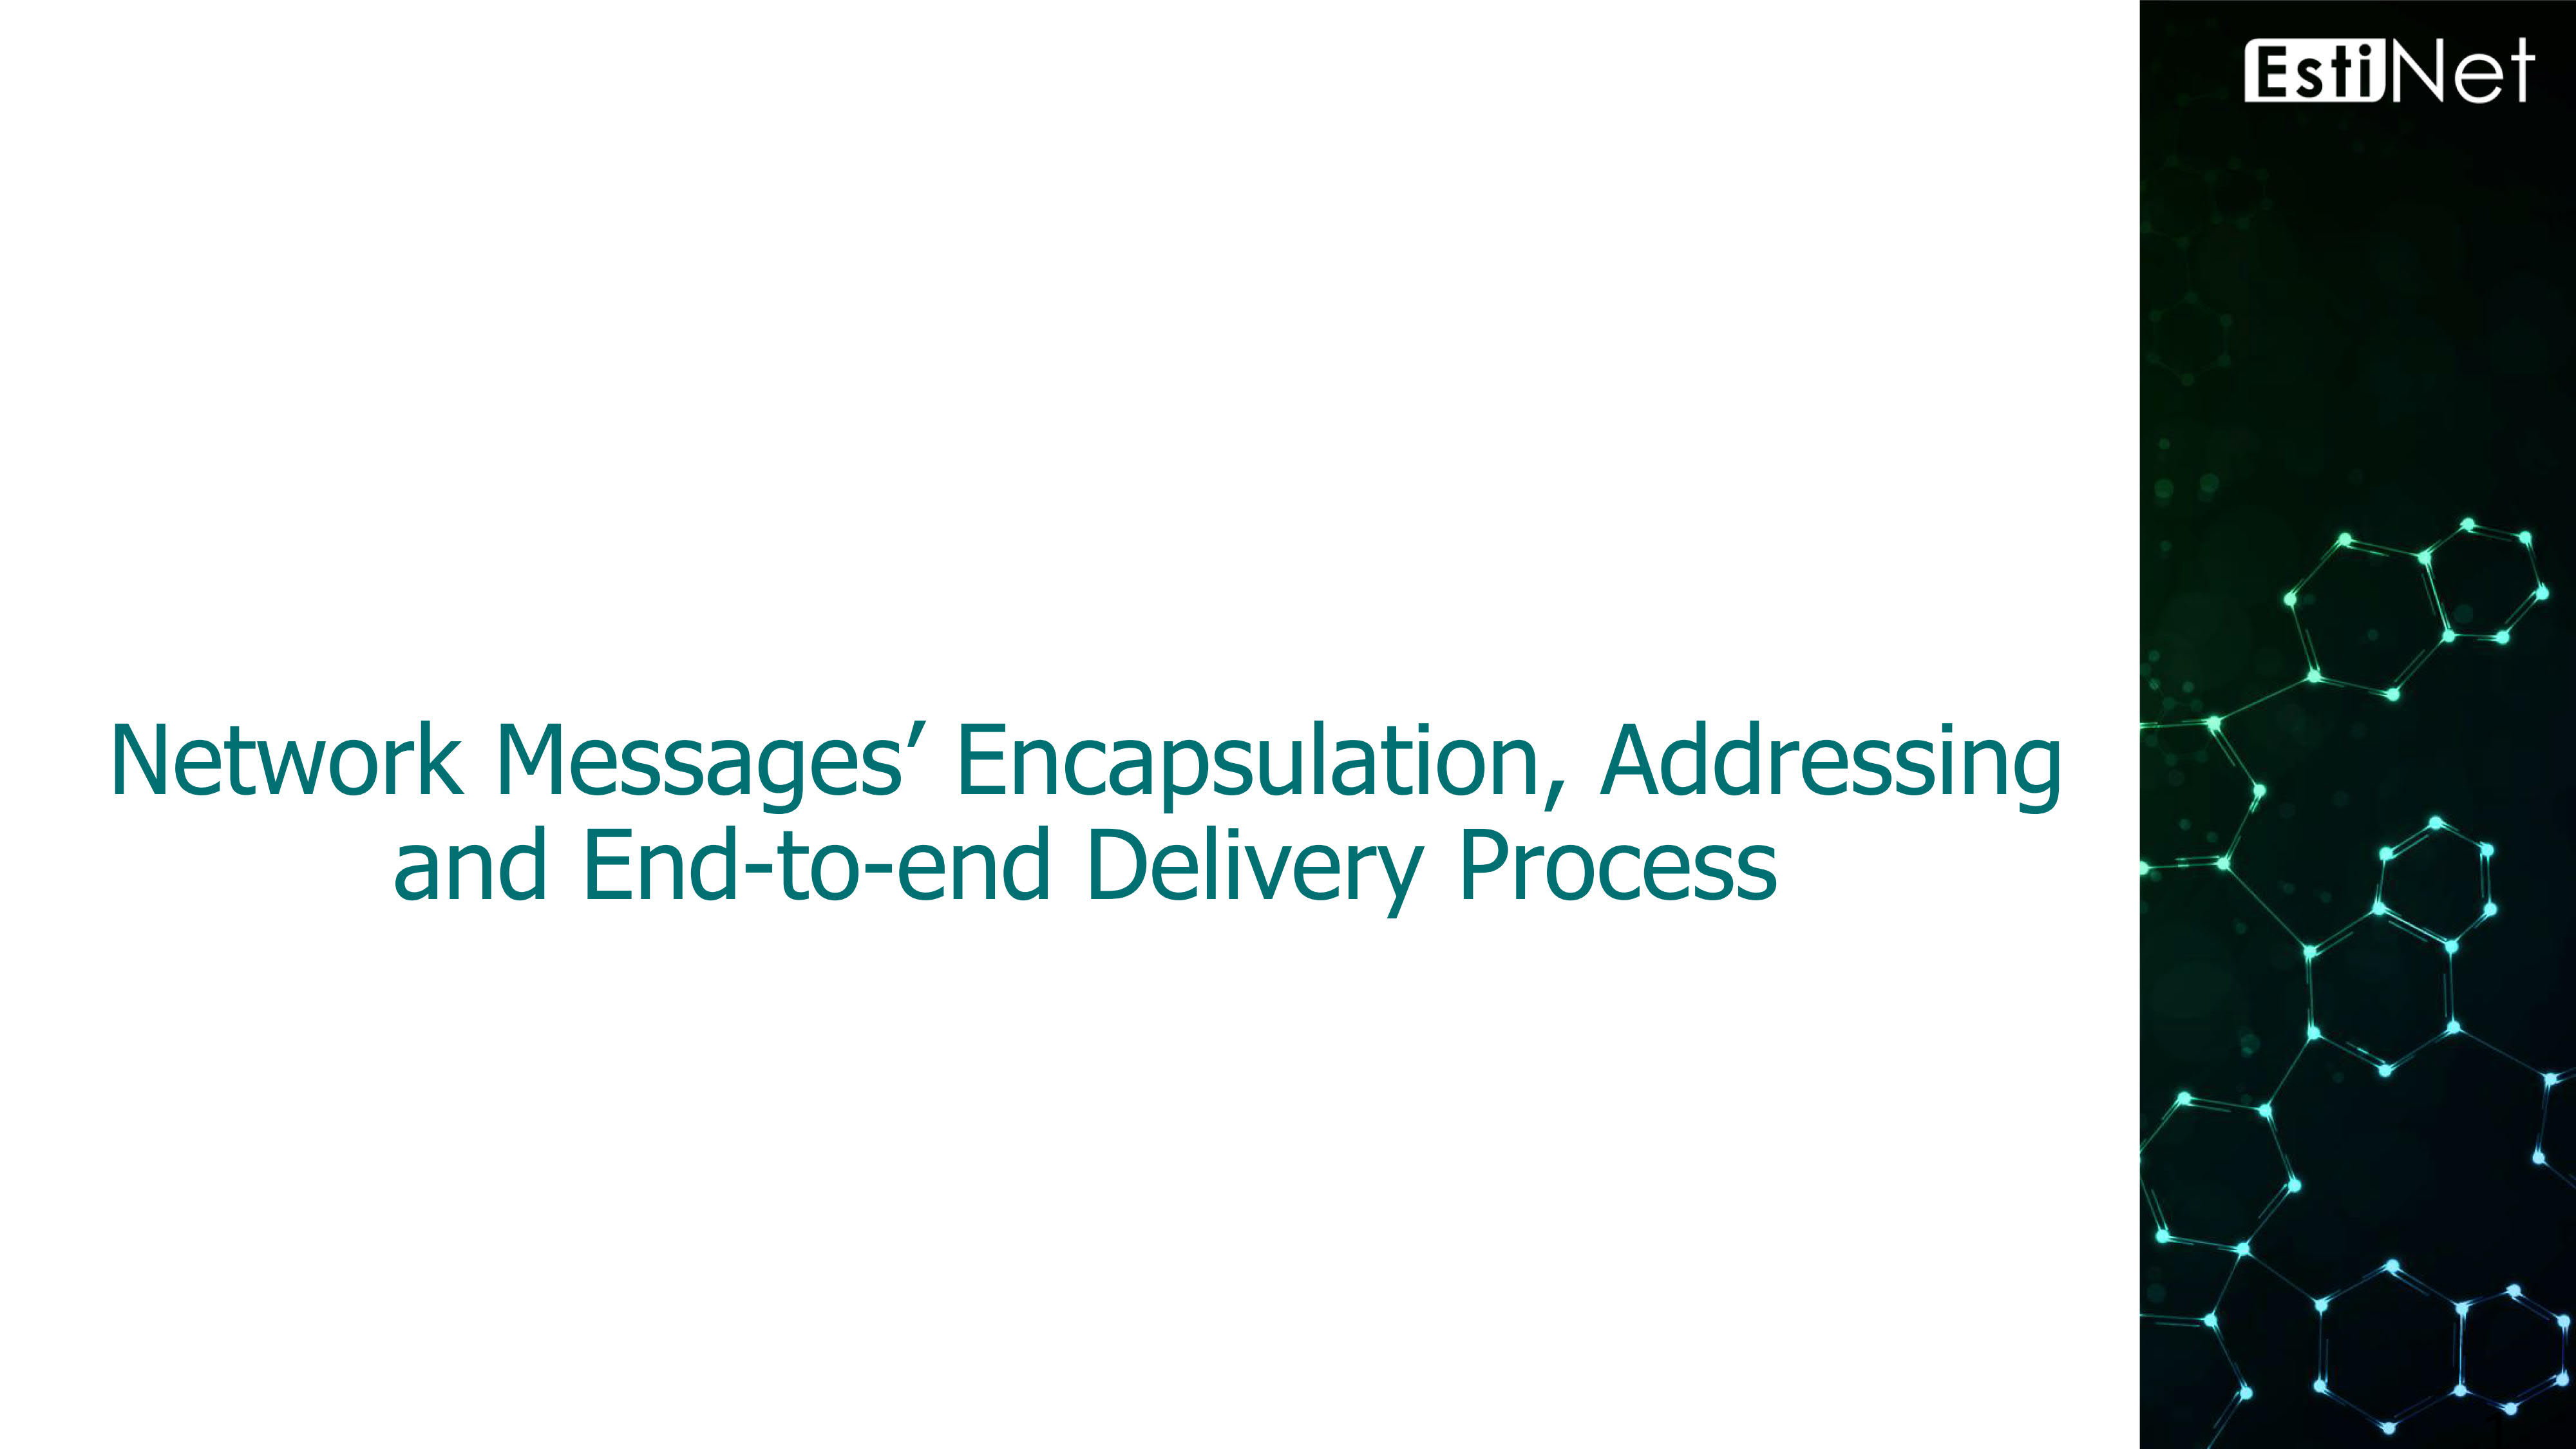 Network Messages' Encapsulation, Addressing and End-to-end Delivery Process_01